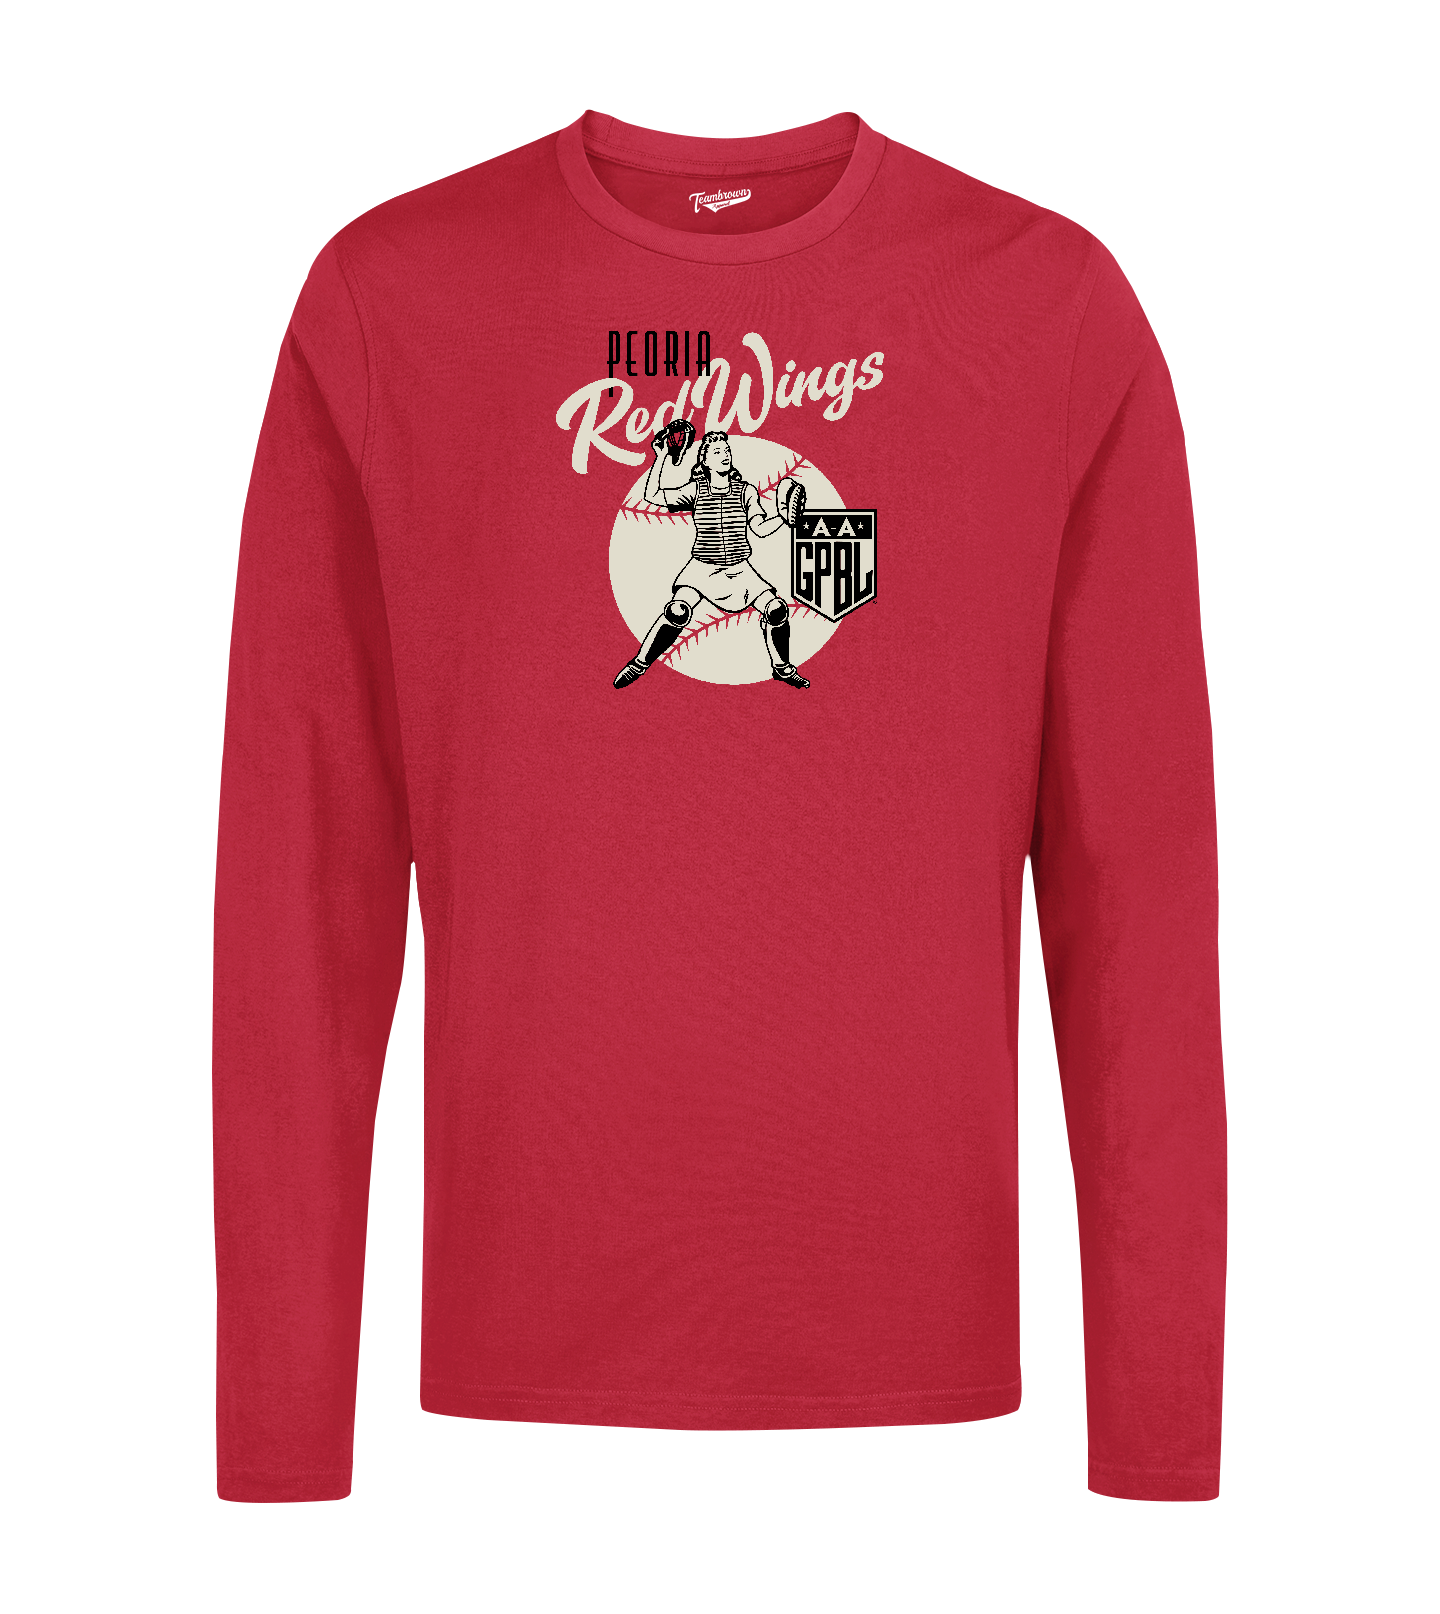 Diamond - Peoria Redwings - Unisex Long Sleeve Crew T-Shirt | Officially Licensed - AAGPBL